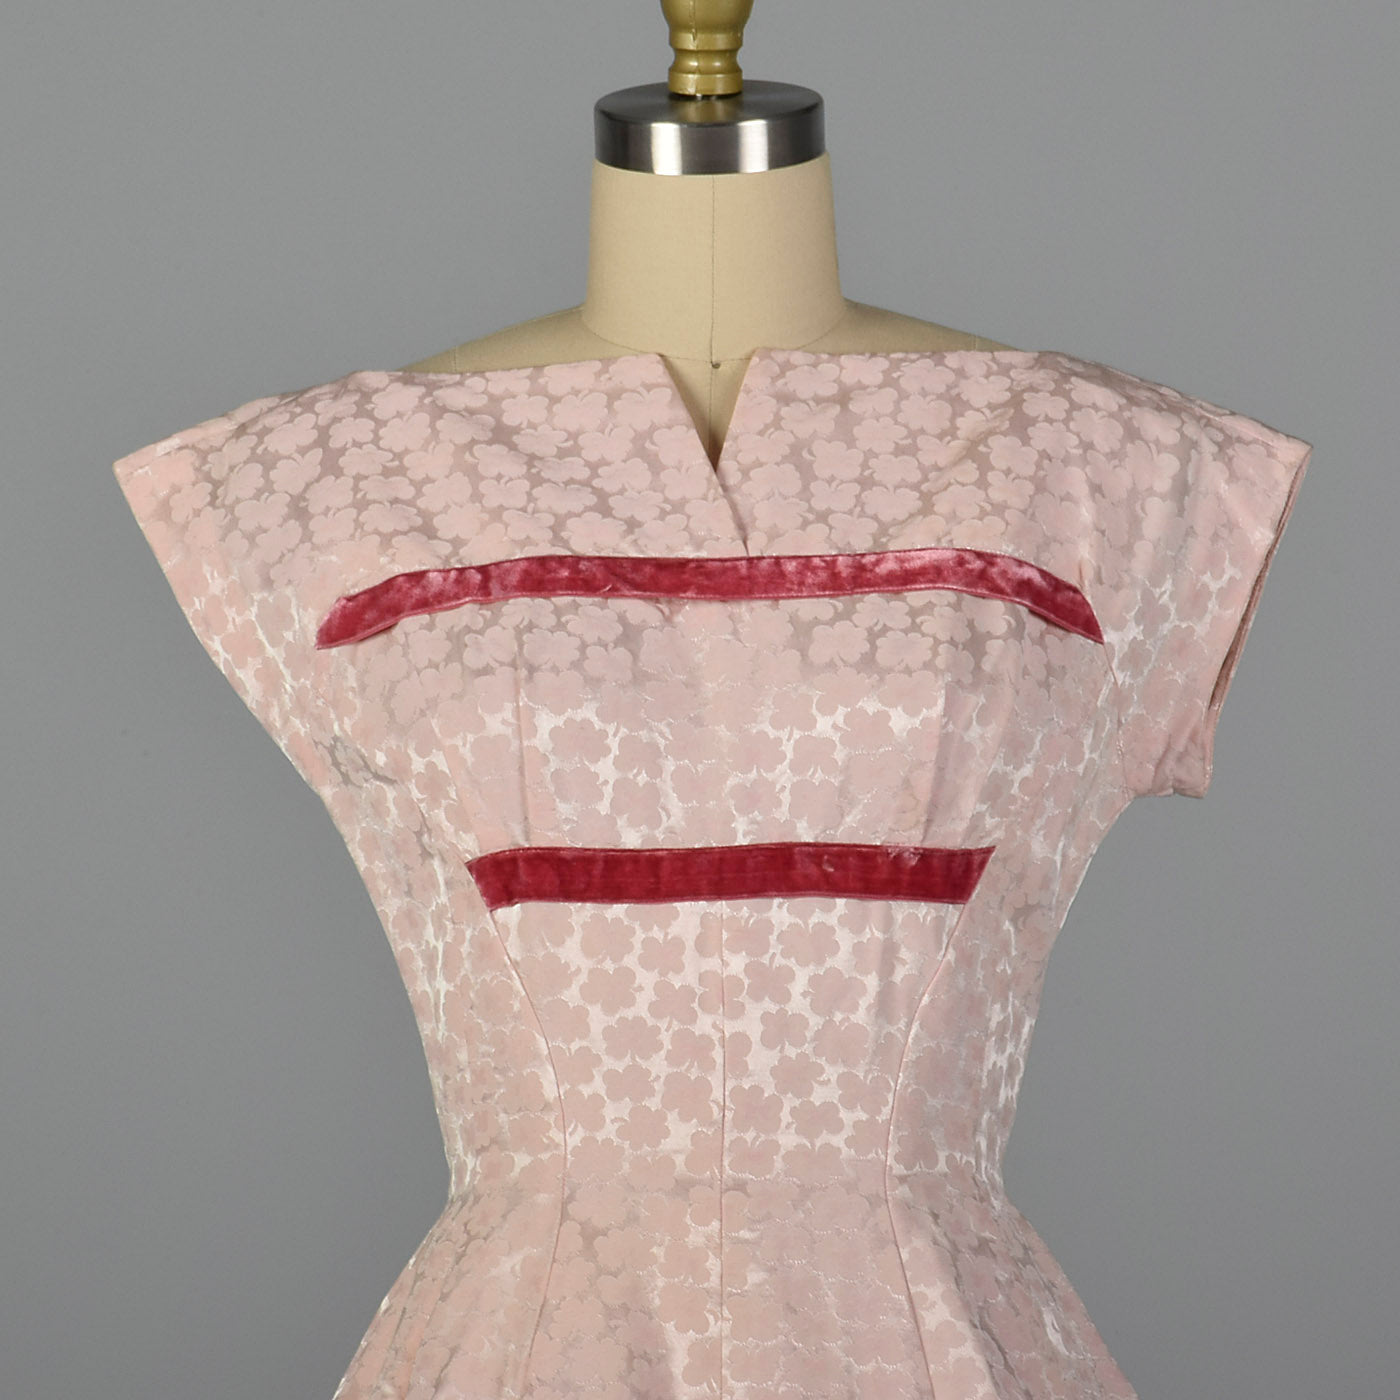 1950s Pink Fit and Flare Party Dress